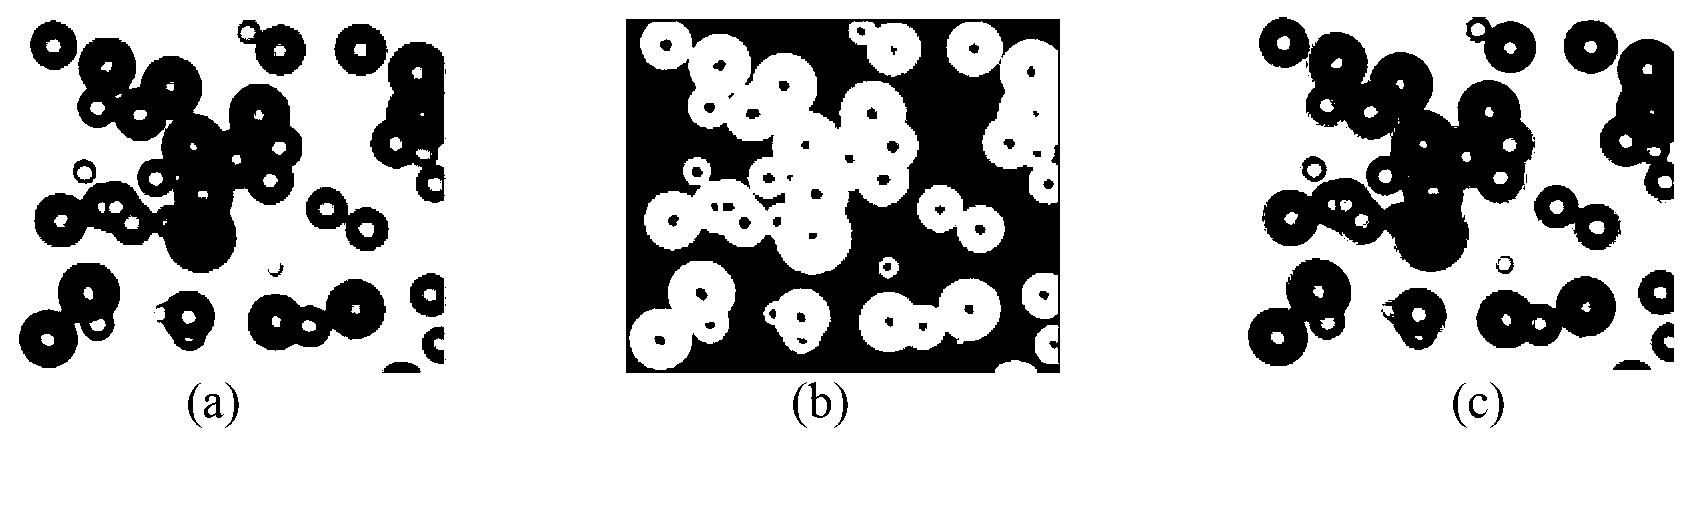 Adherence separation algorithm of intensive solid state nuclear tracks